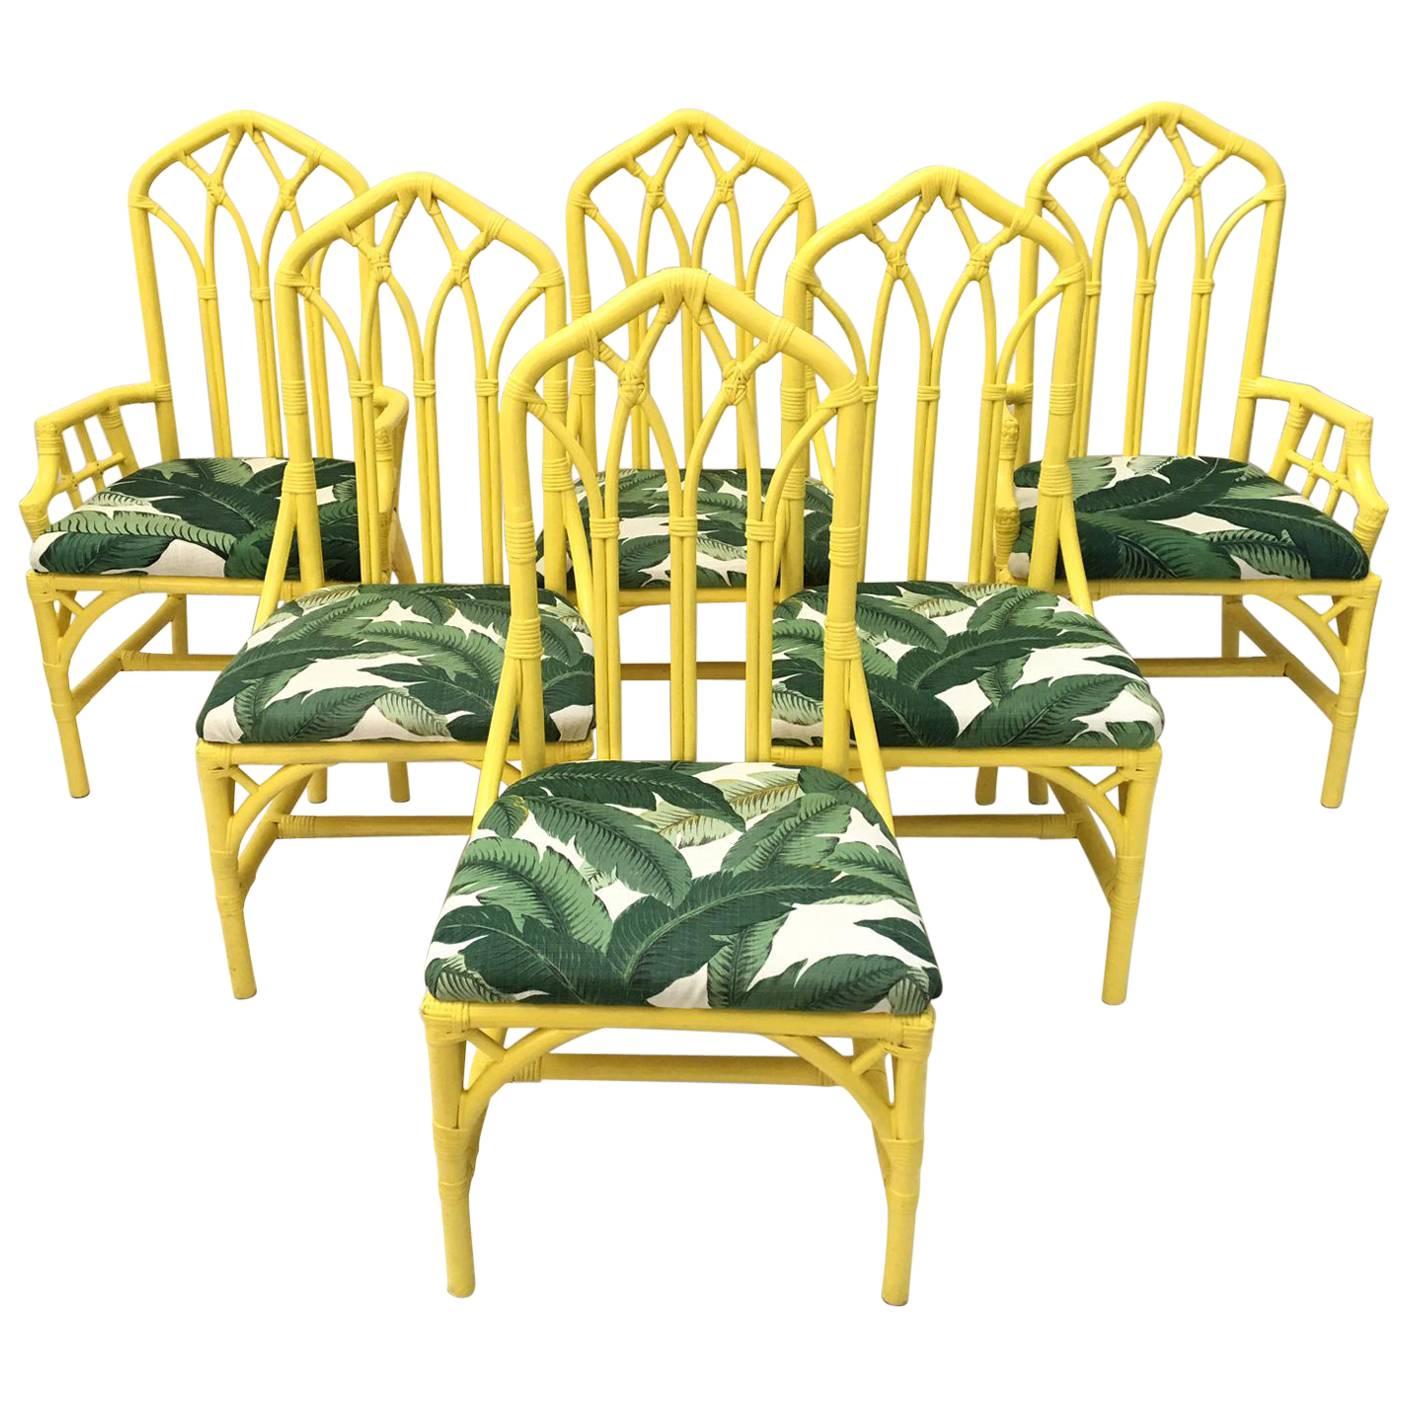 Tropical Banana Leaf Print Bamboo Rattan Dining Chairs by Henry Link